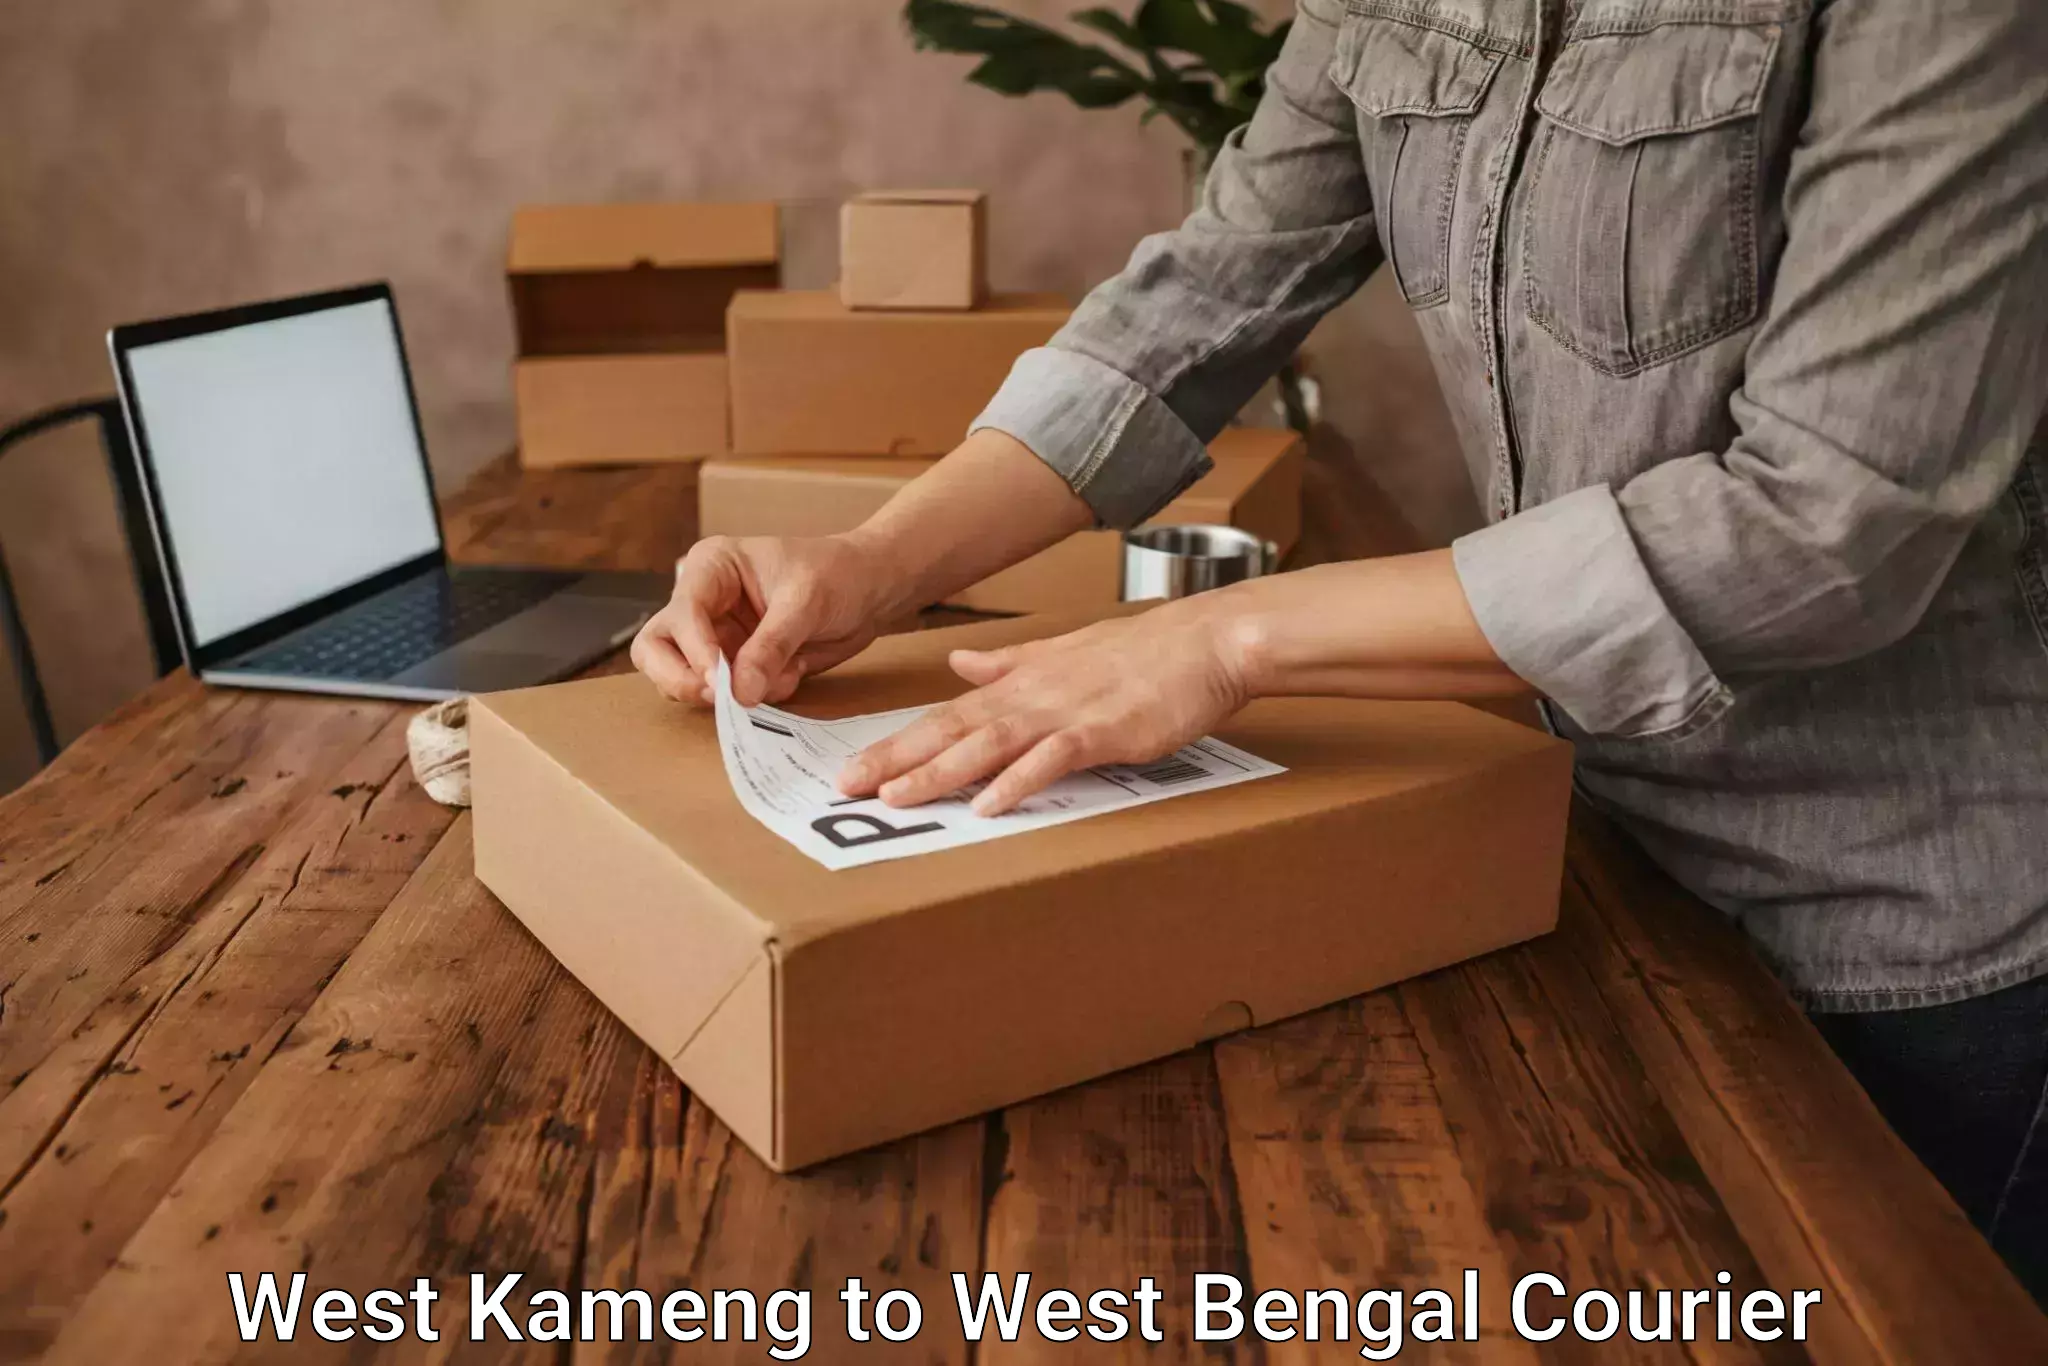 Subscription-based courier West Kameng to Para Purulia